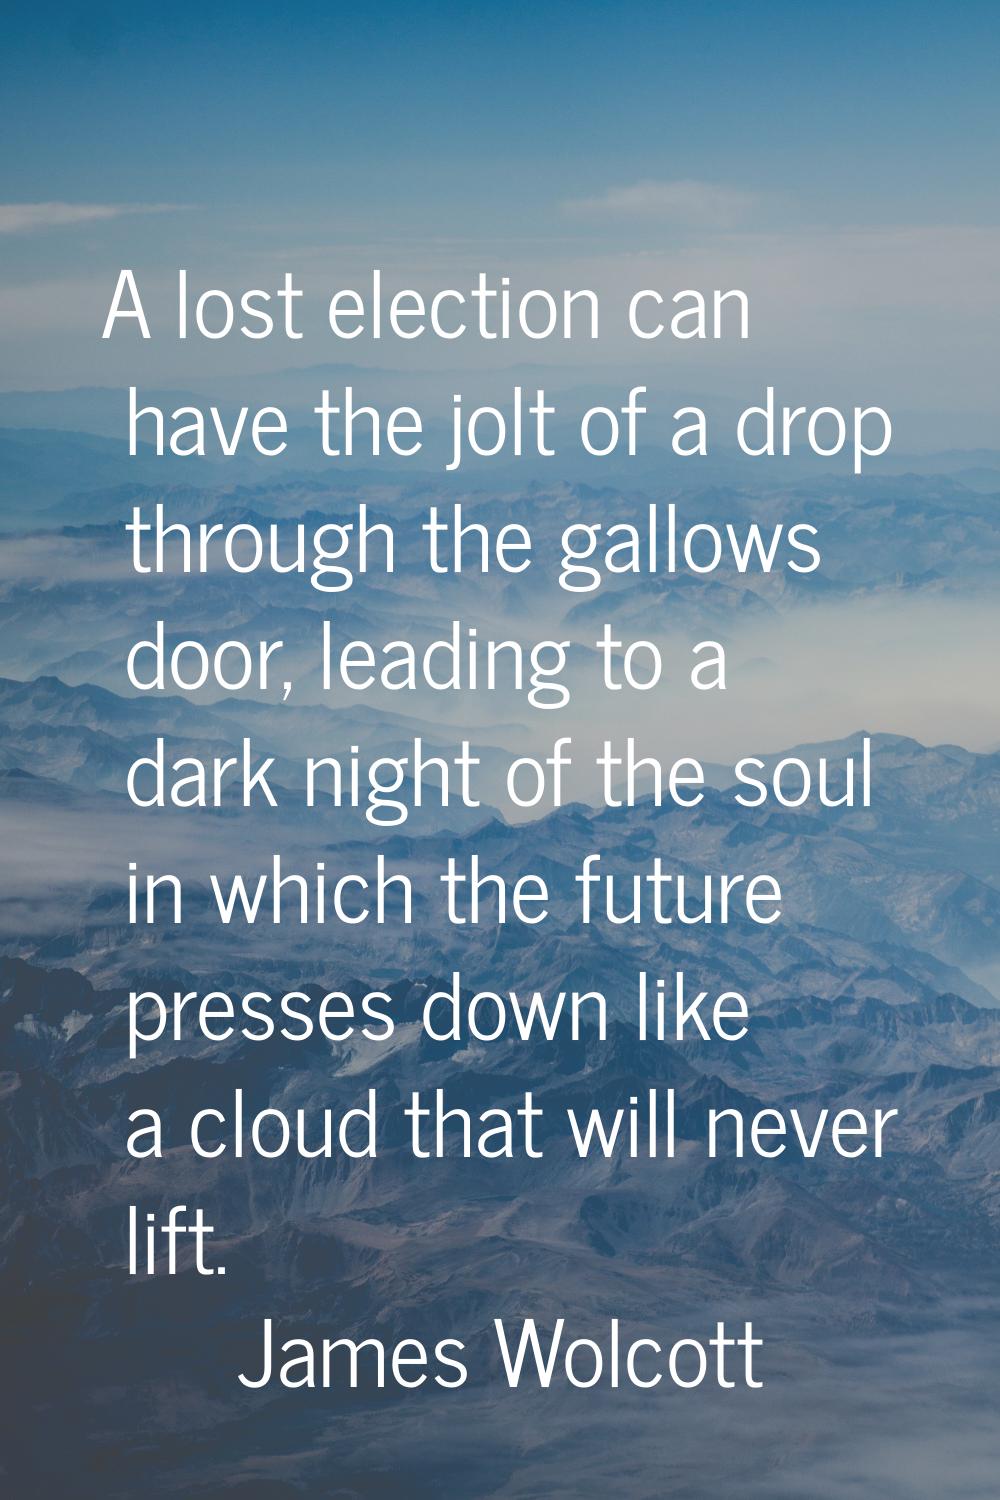 A lost election can have the jolt of a drop through the gallows door, leading to a dark night of th